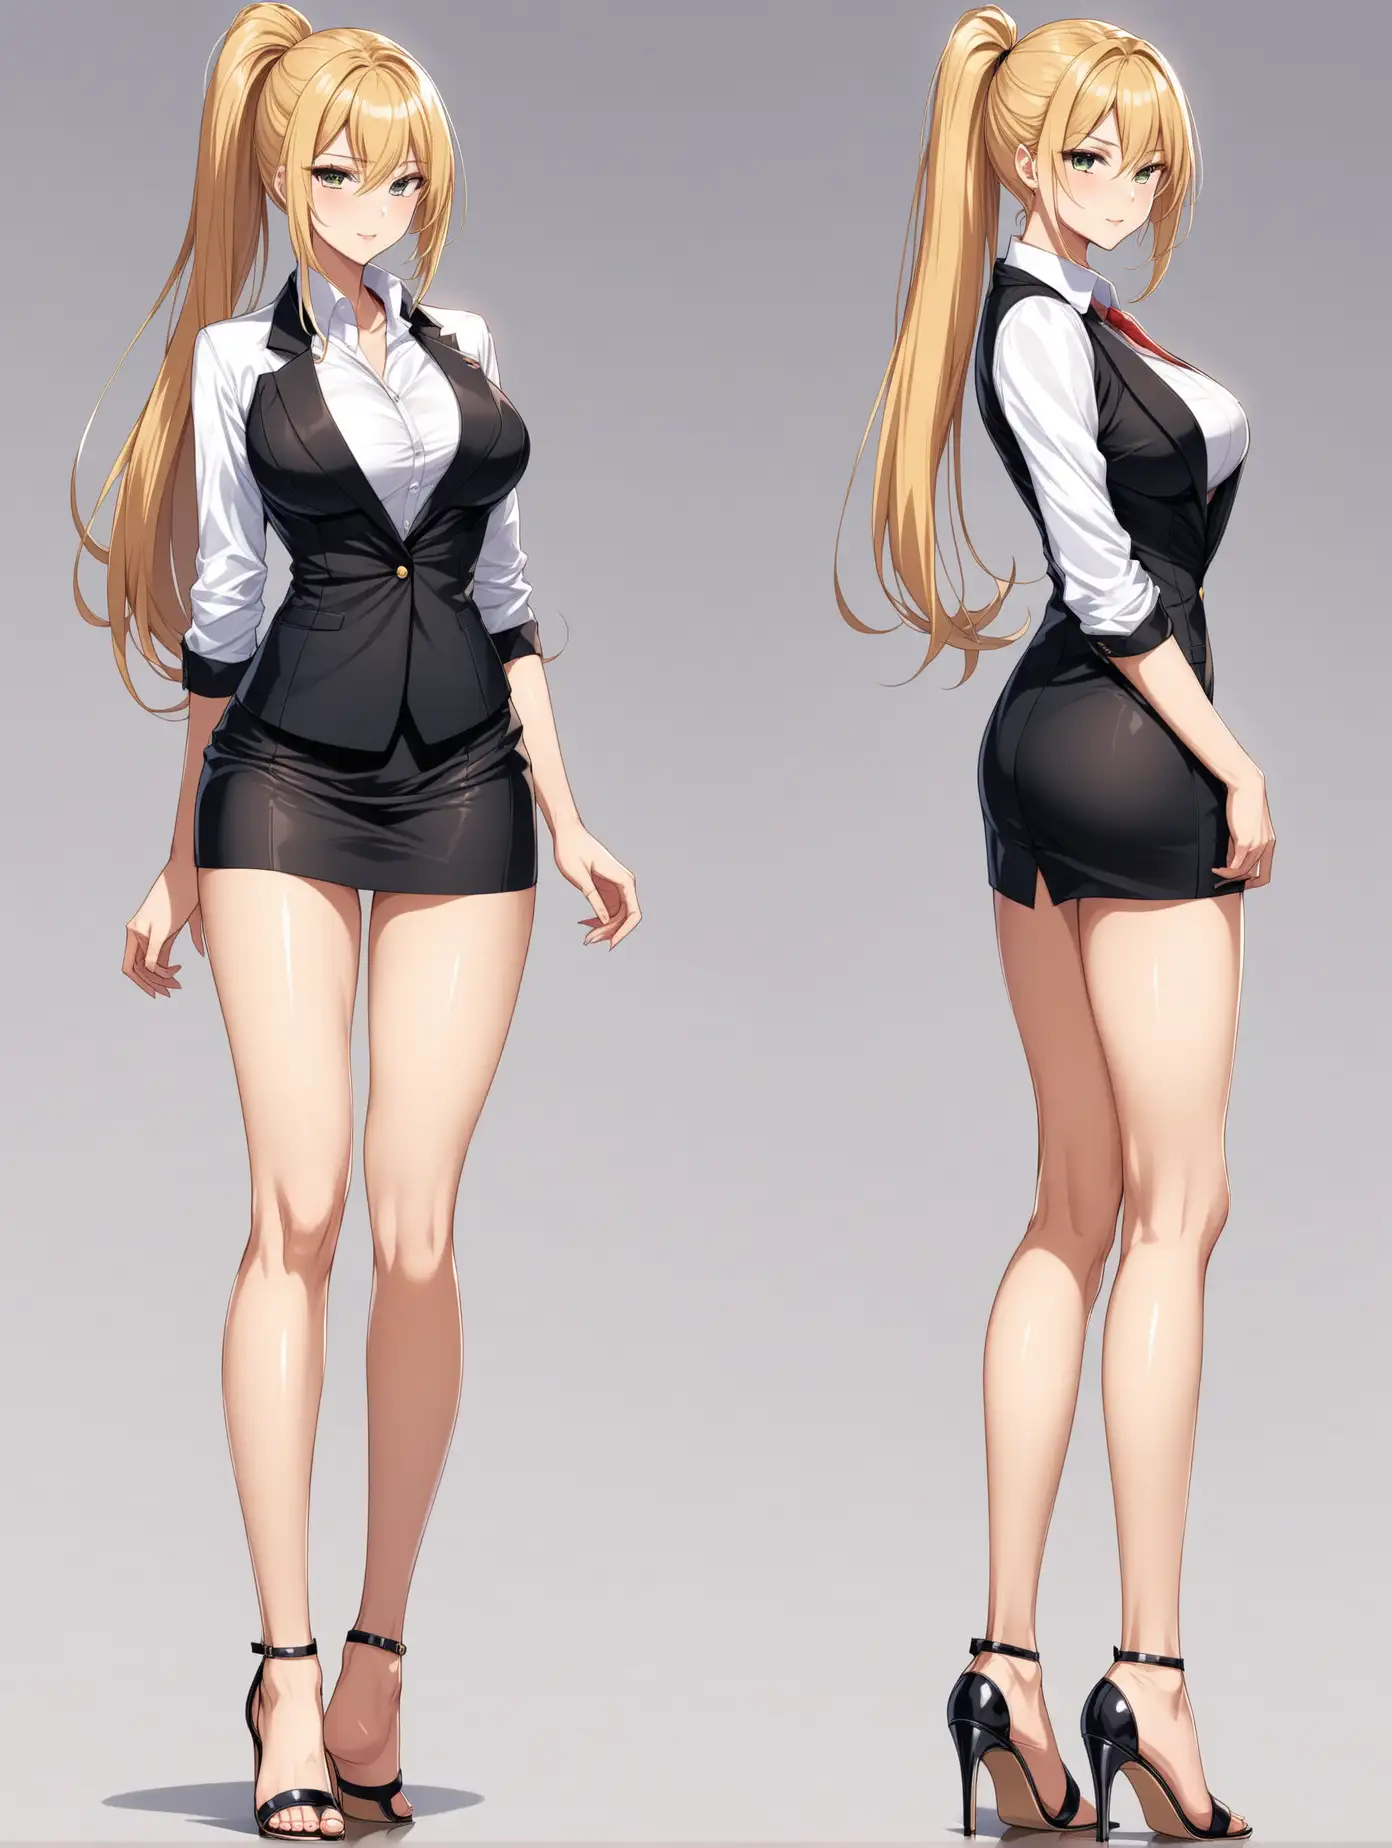 Sensual picture in full body of a anime girl, hot, elegant, business leader, height tall, blonde hair, long ponytail, ankle strip high heels sandals, 2 poses